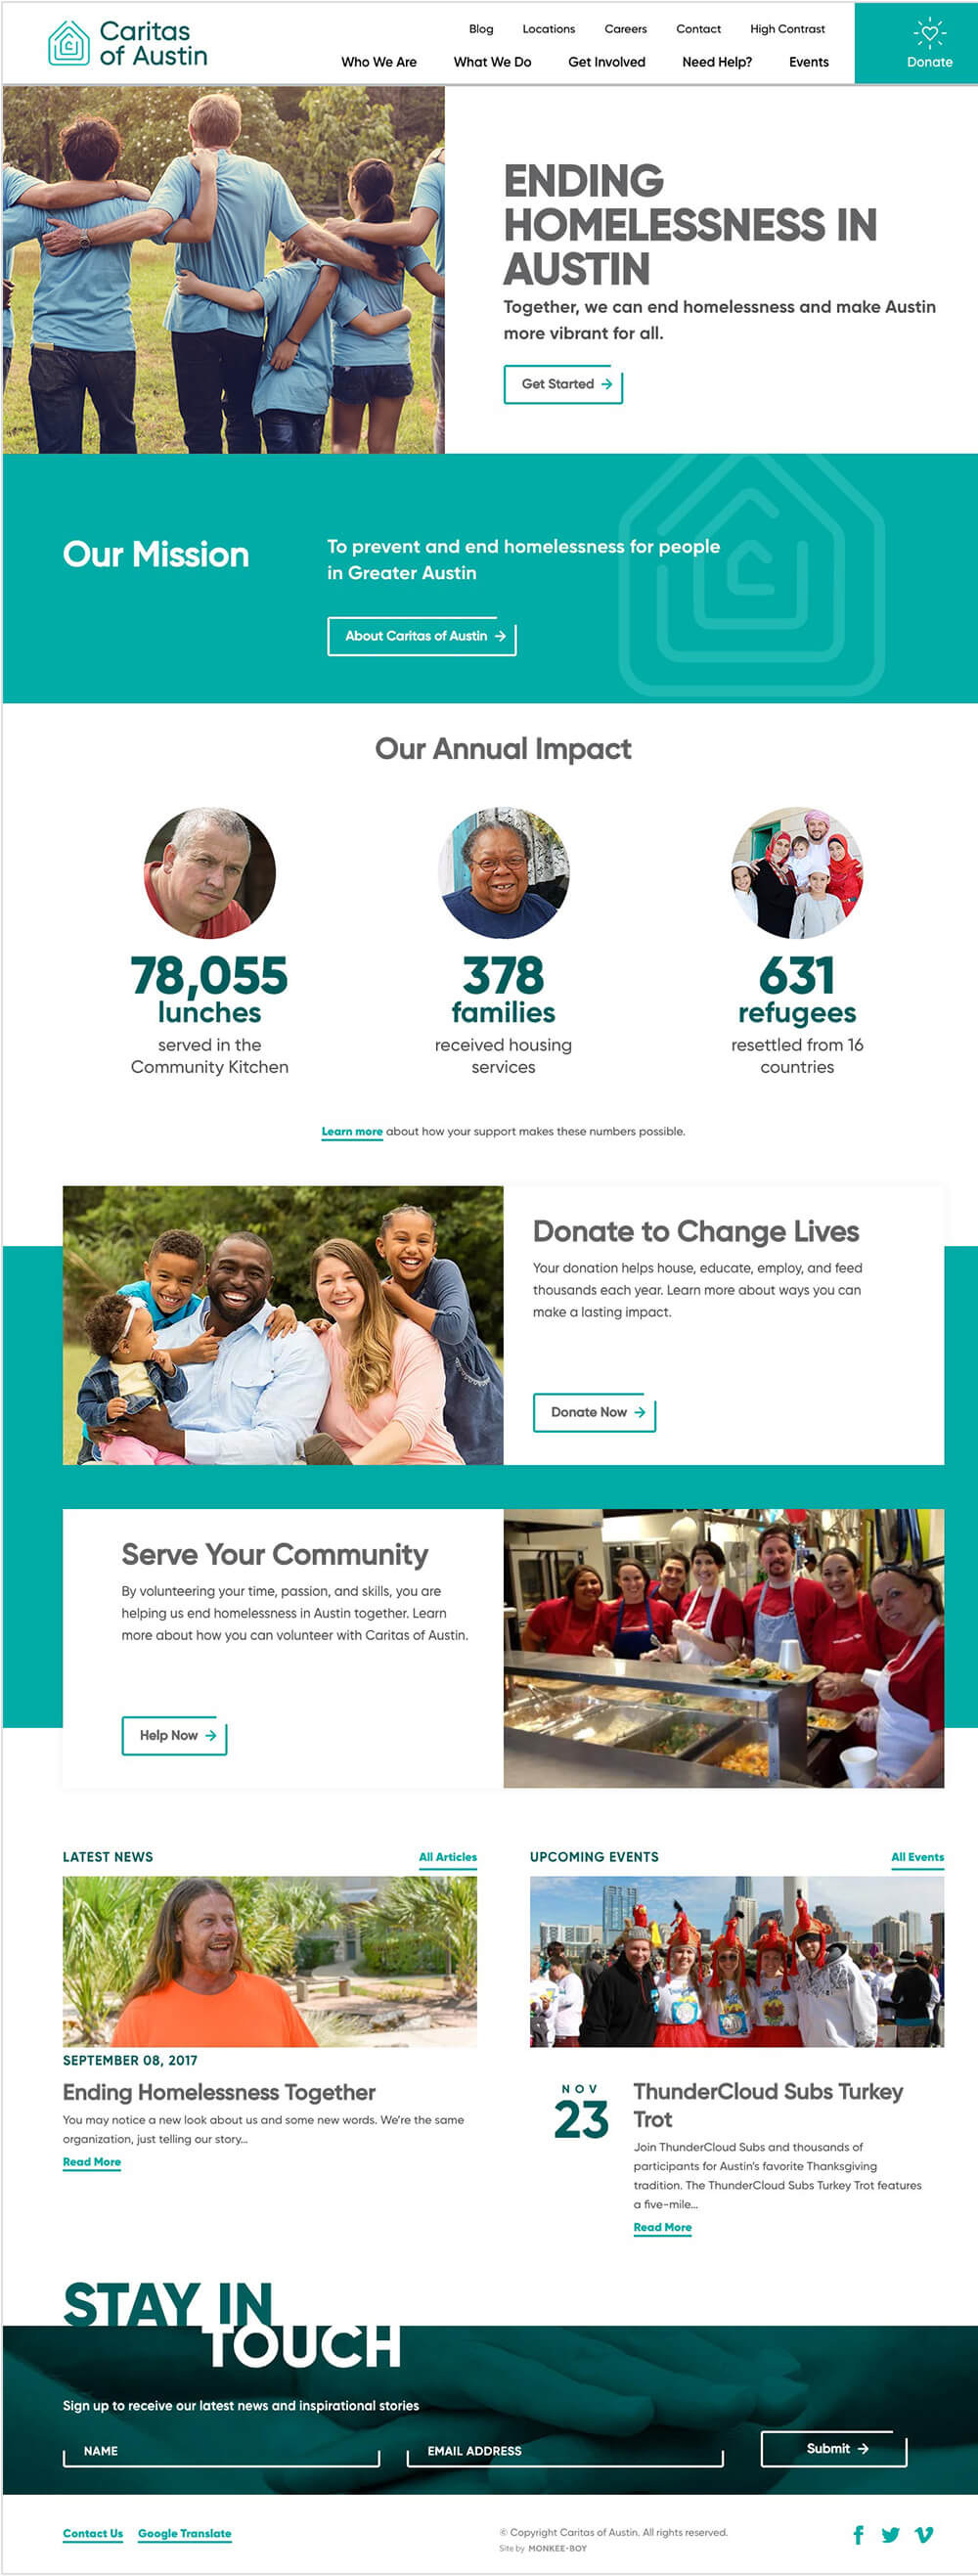 Homepage view of the Caritas of Austin website.